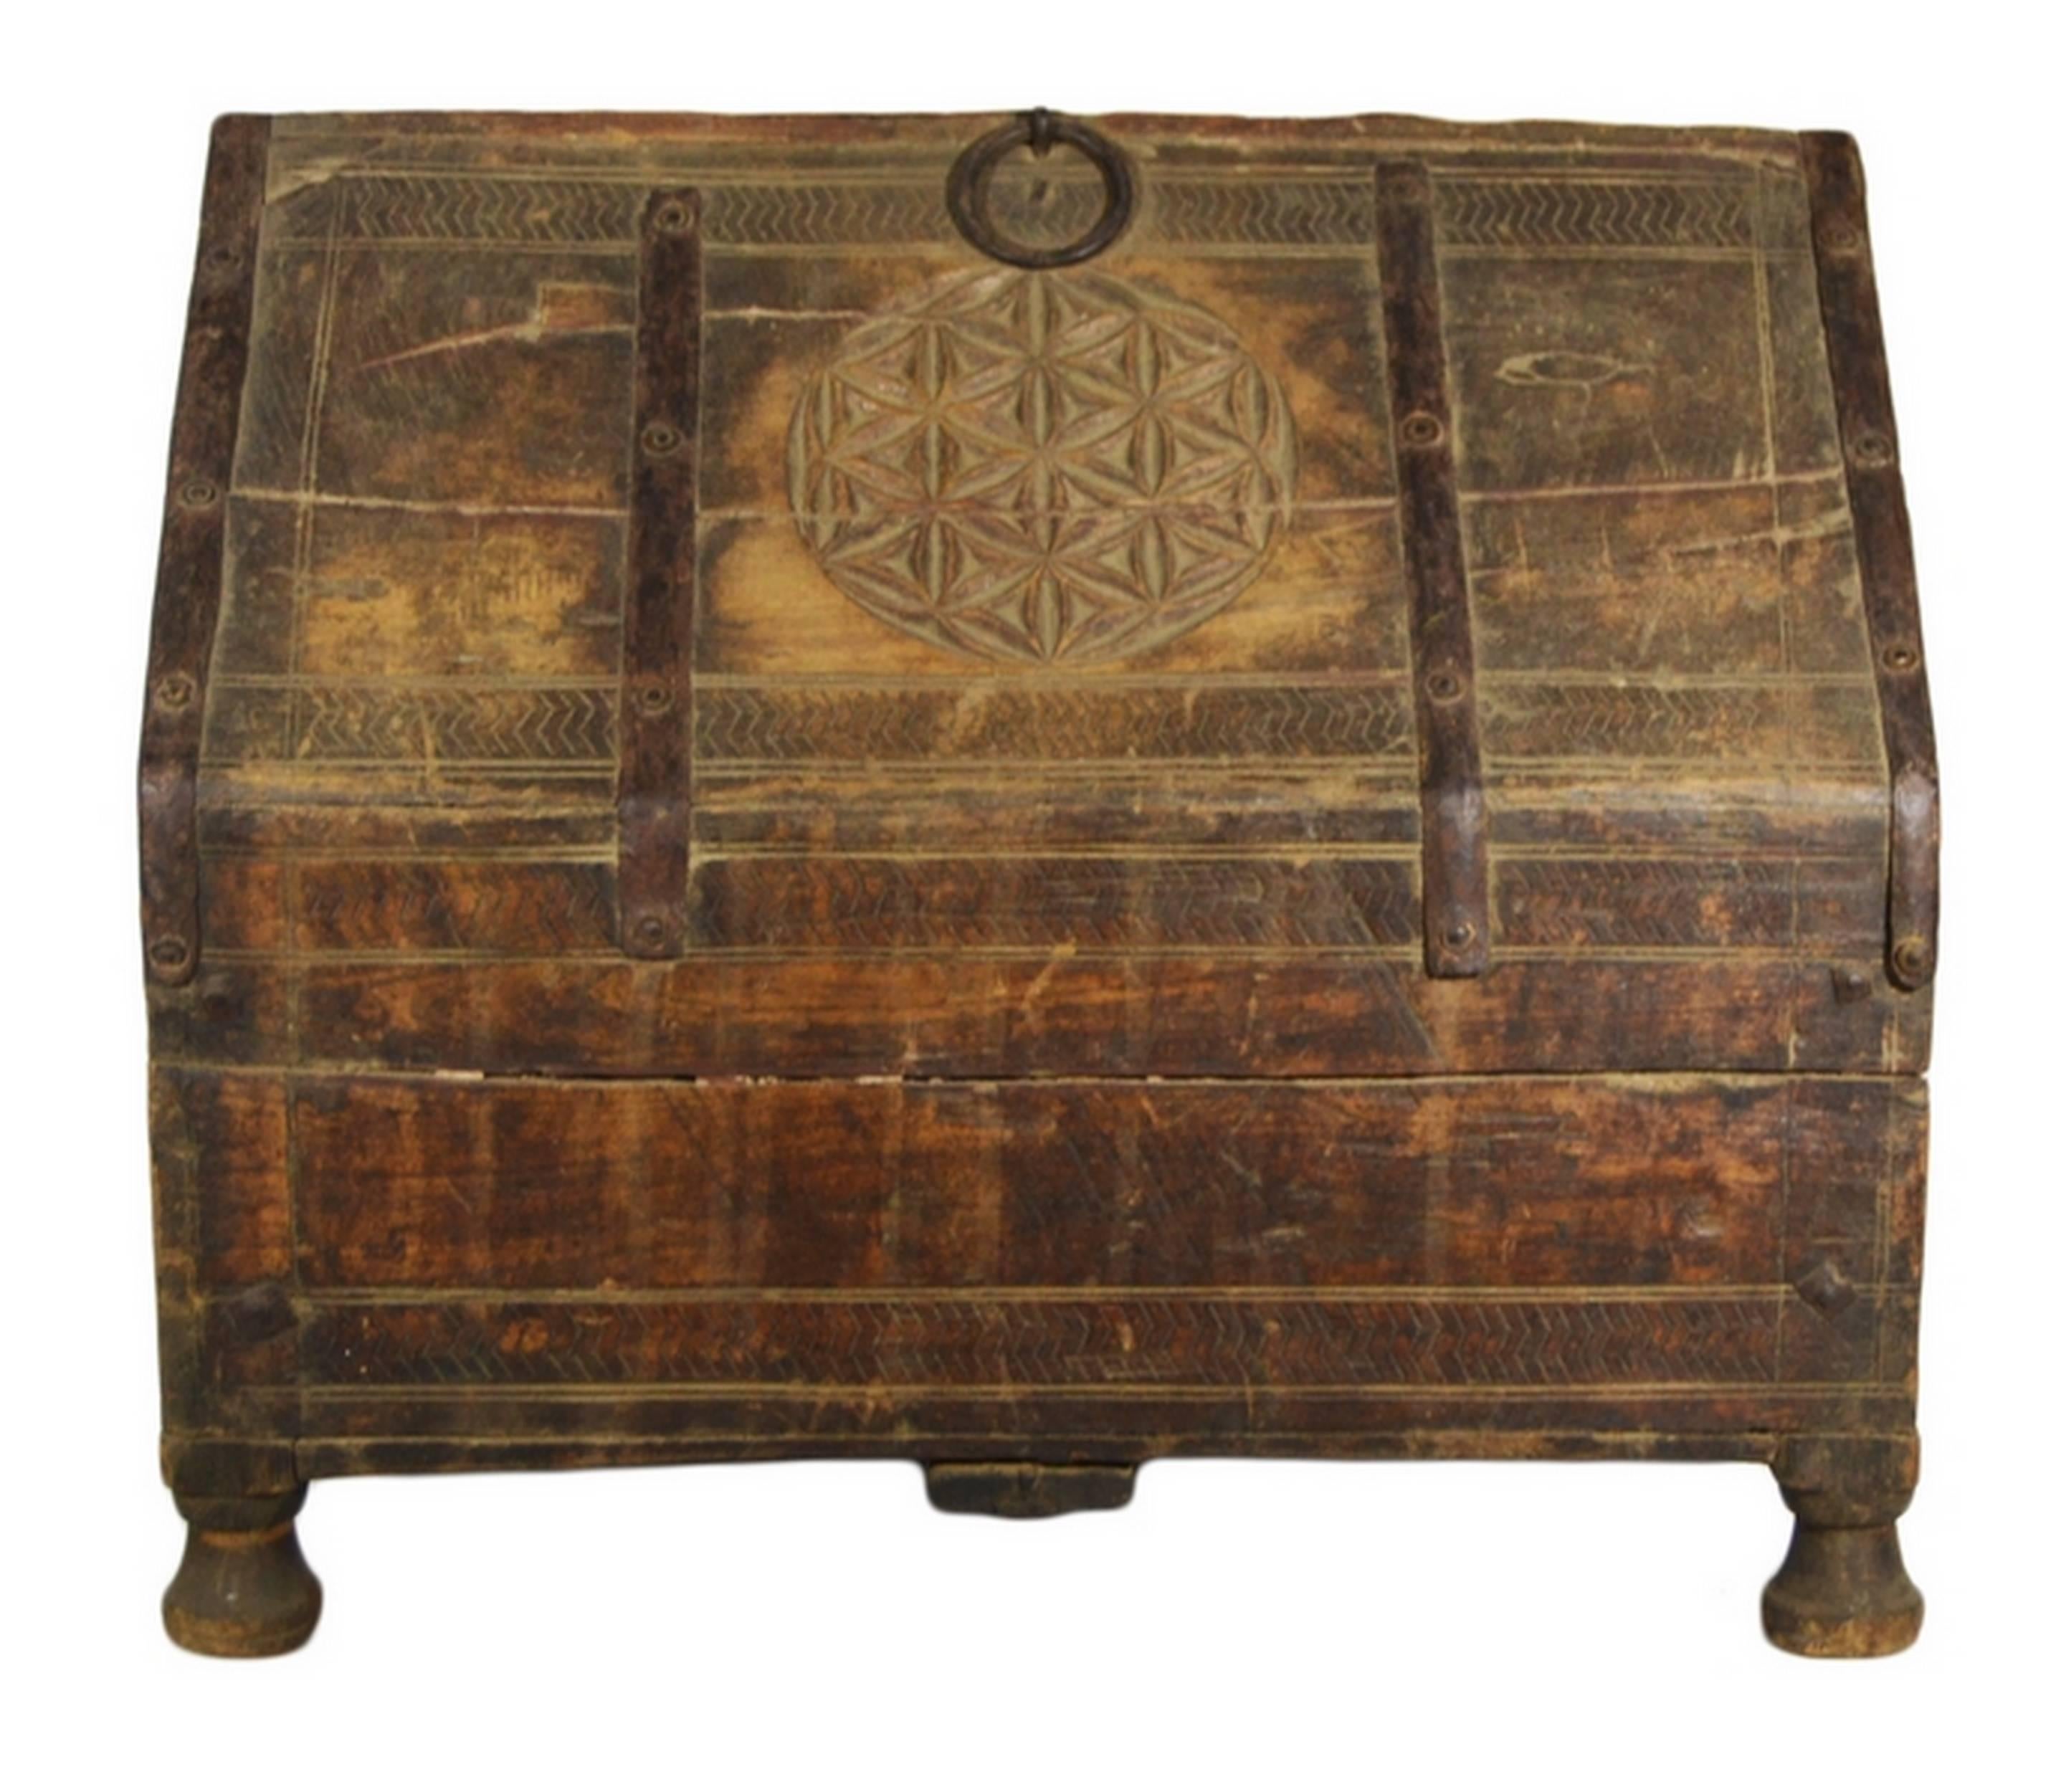 Hand-Carved Antique Indian Mughal Wood Dowry Chest with Carved Patterns, 19th Century For Sale